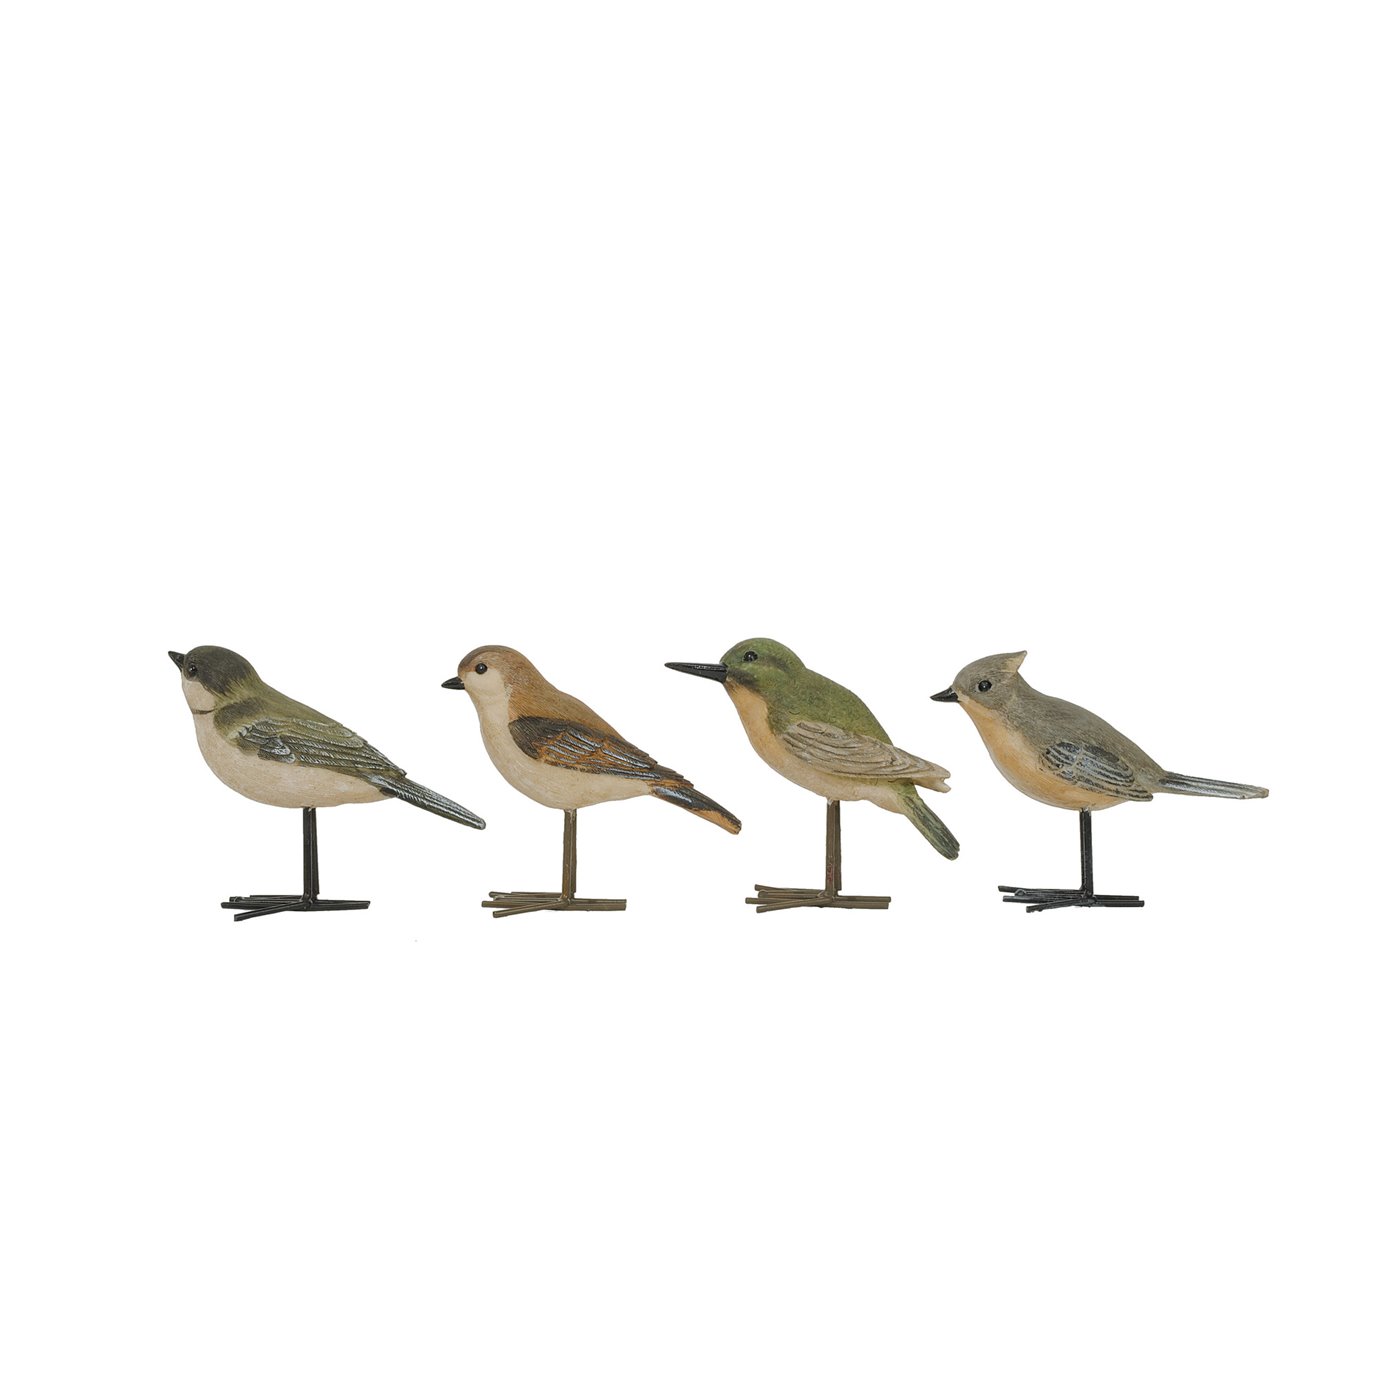 Resin Birds with Metal Feet (Set of 4 Styles)